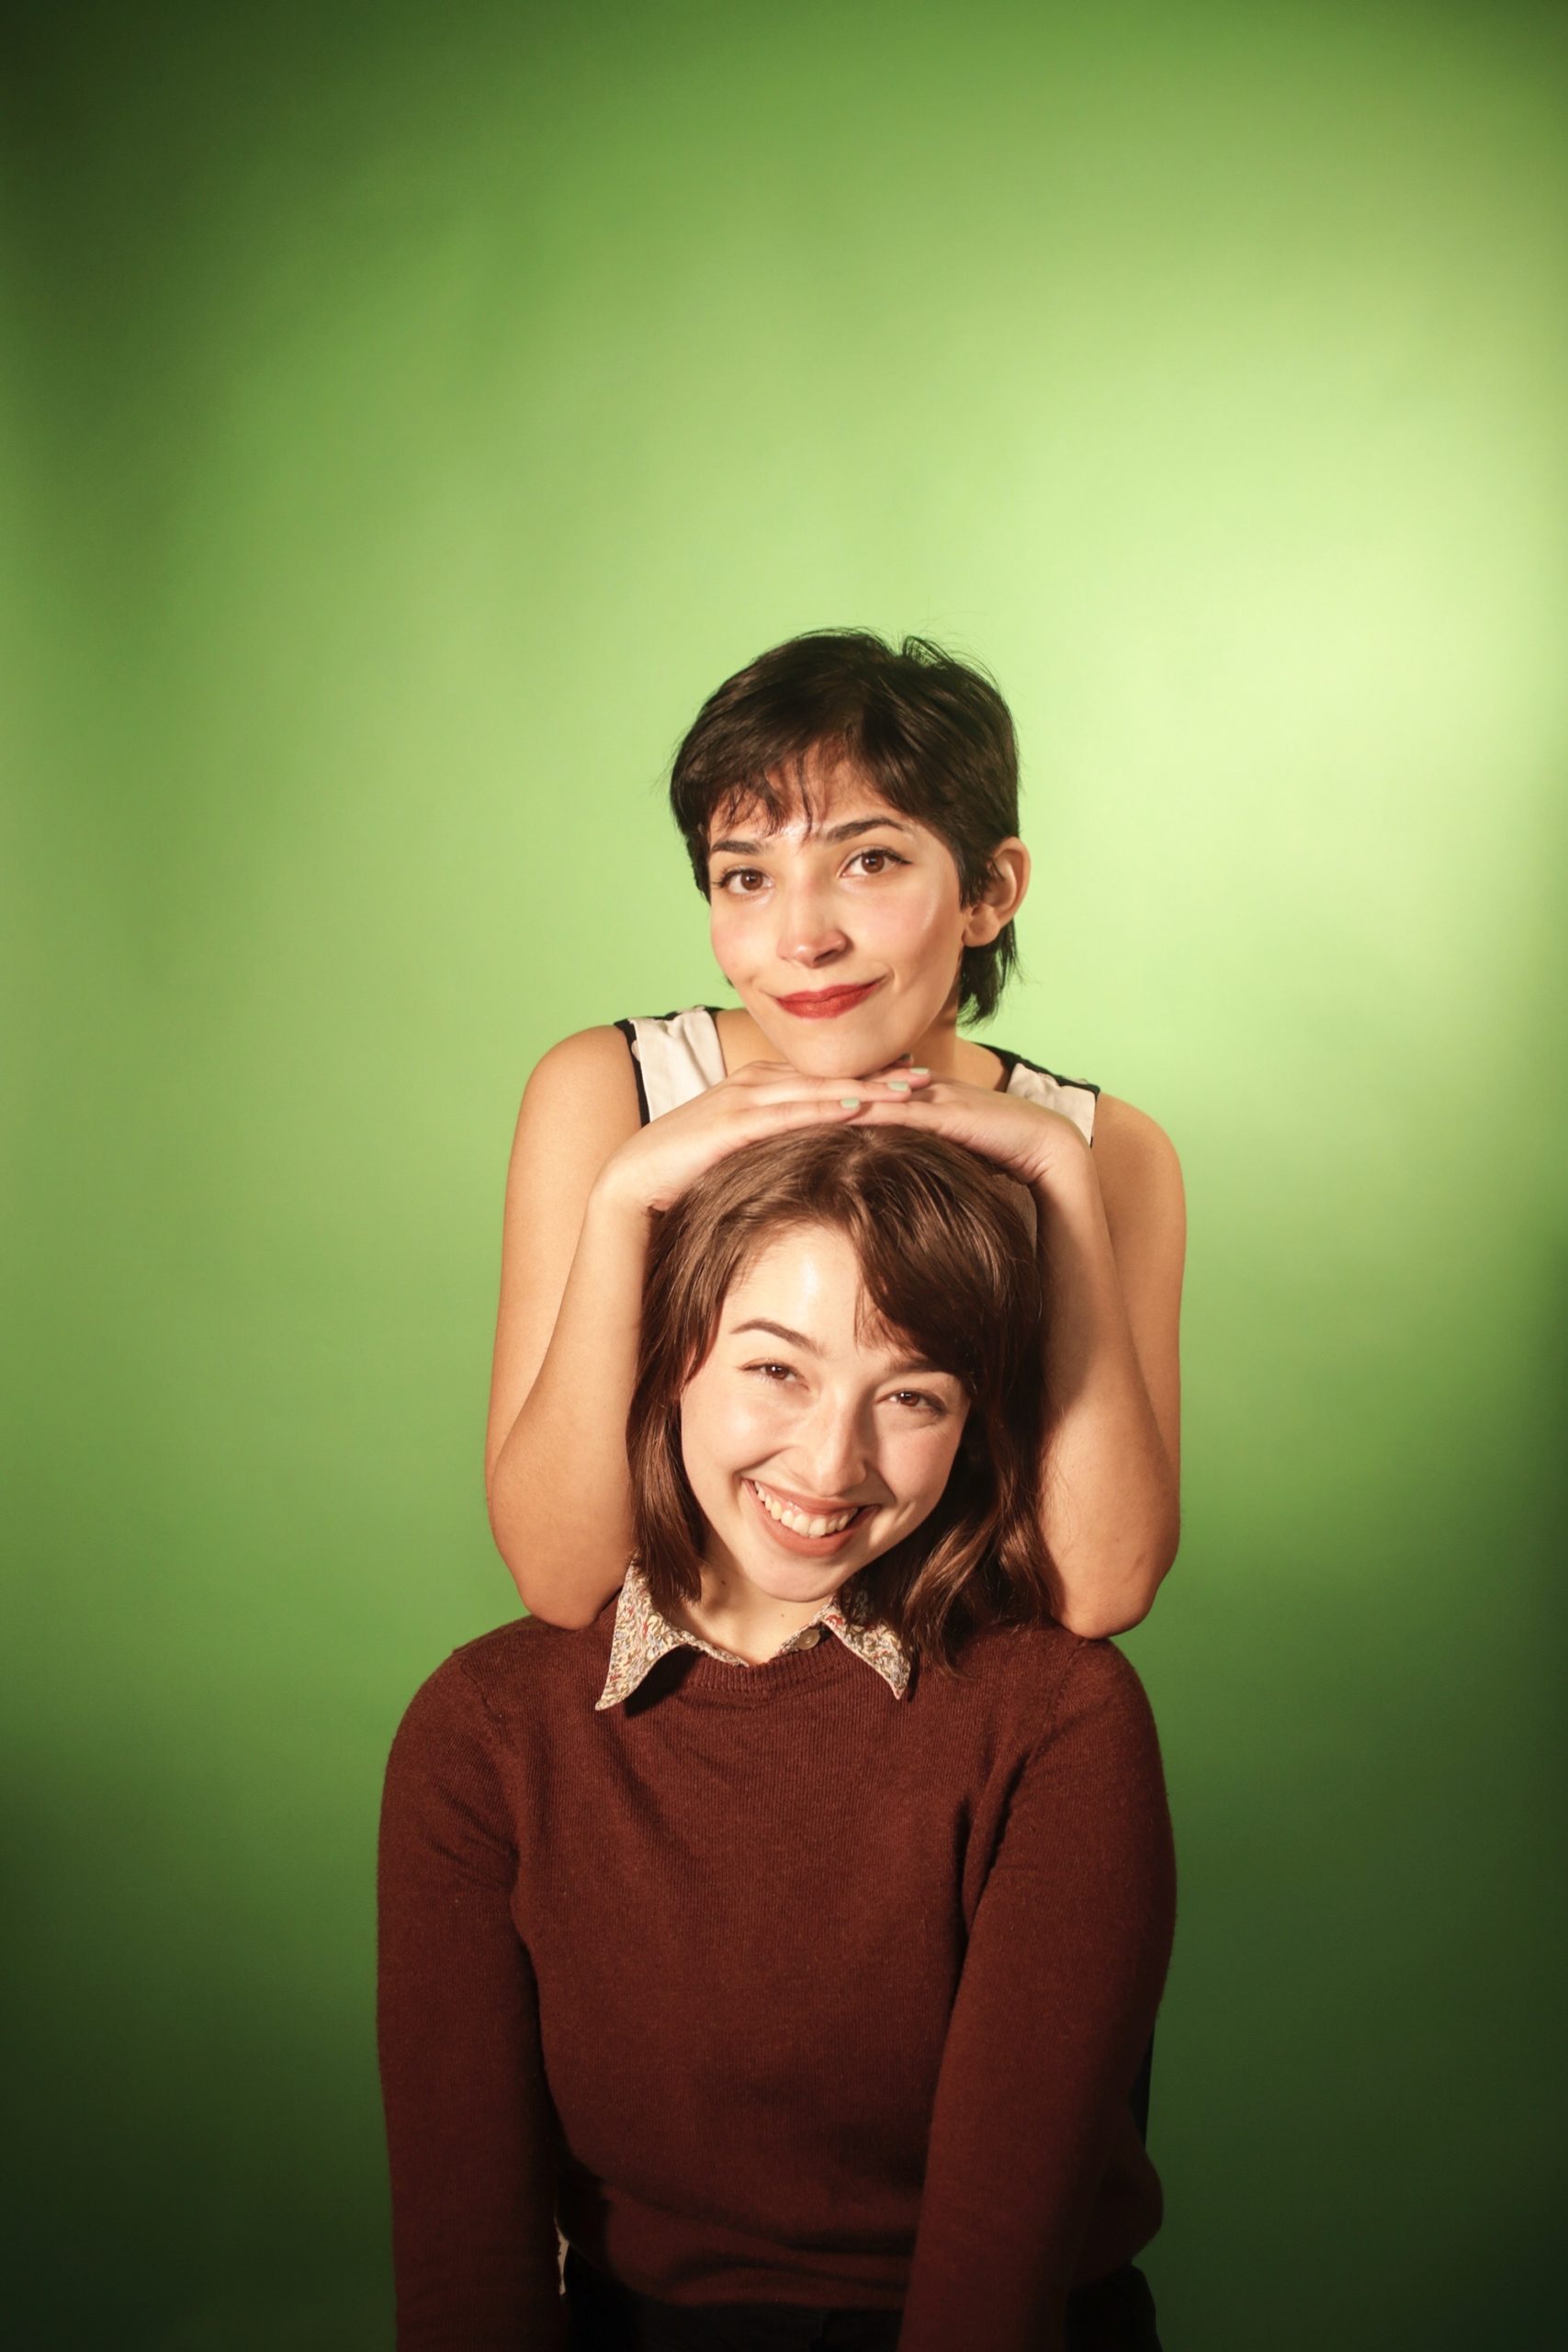 Tinu Thomas and Haley Butler pose with a green background